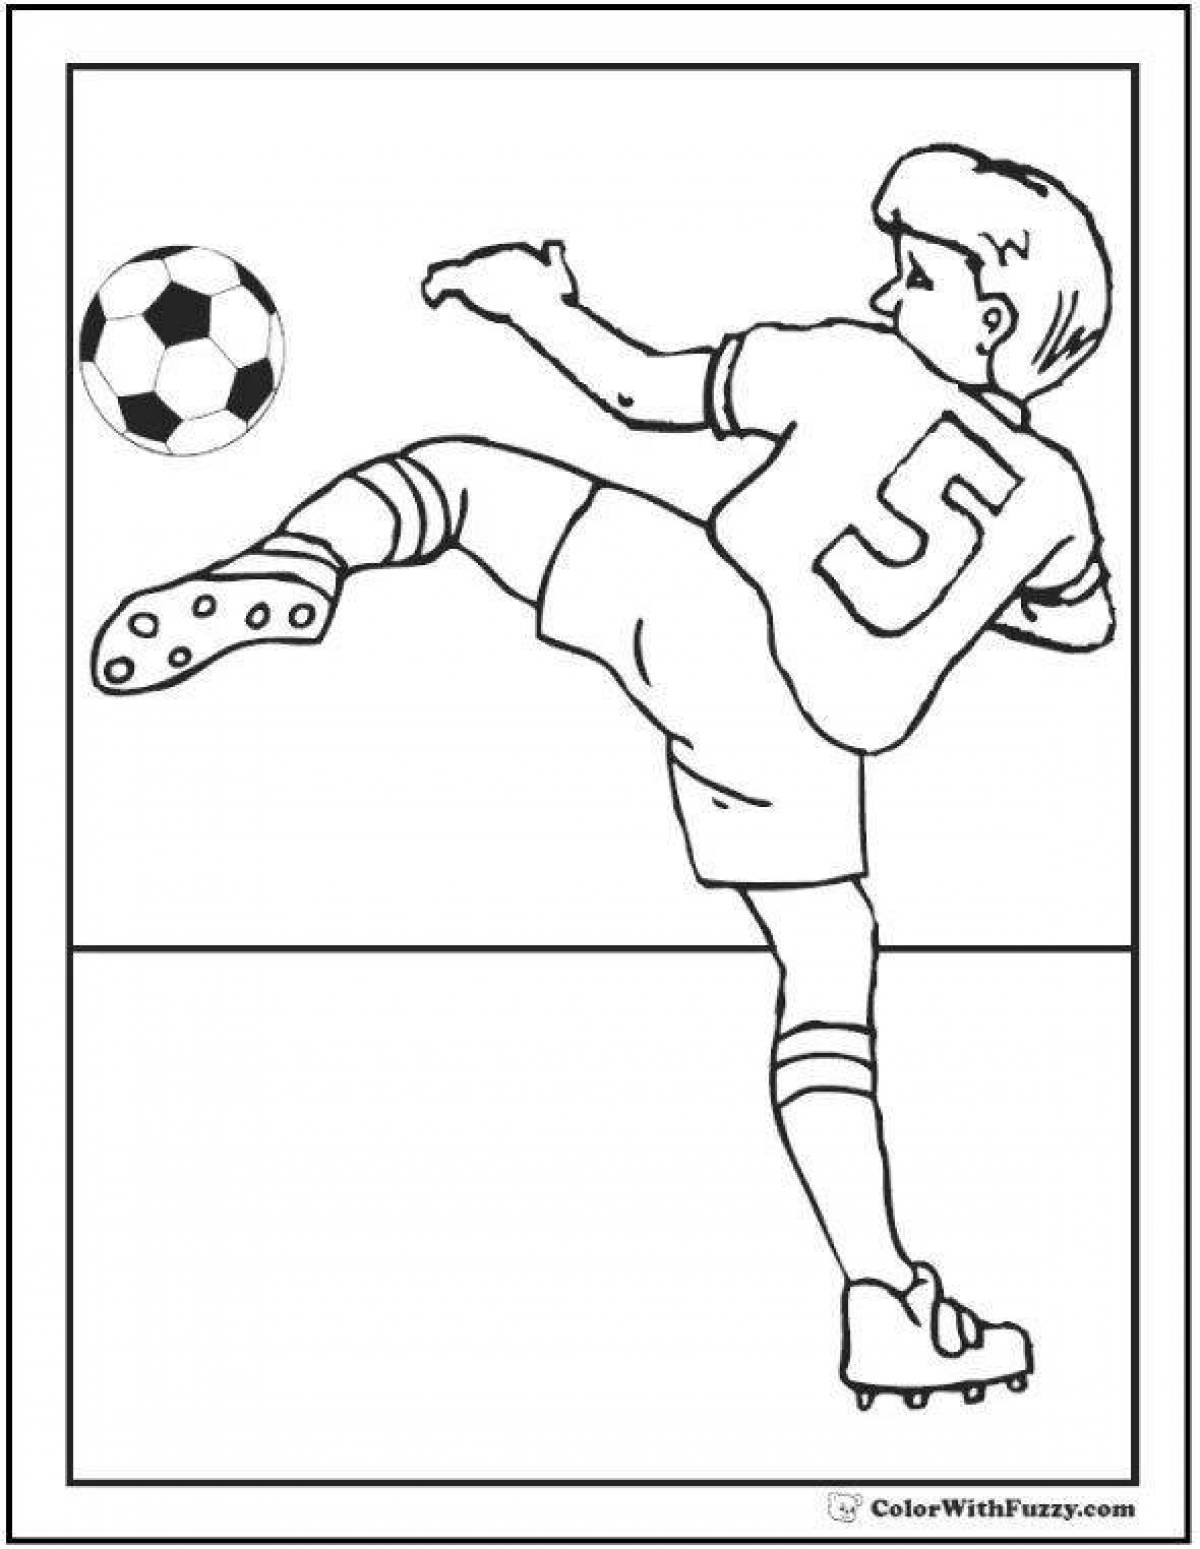 Coloring book humorous football for boys